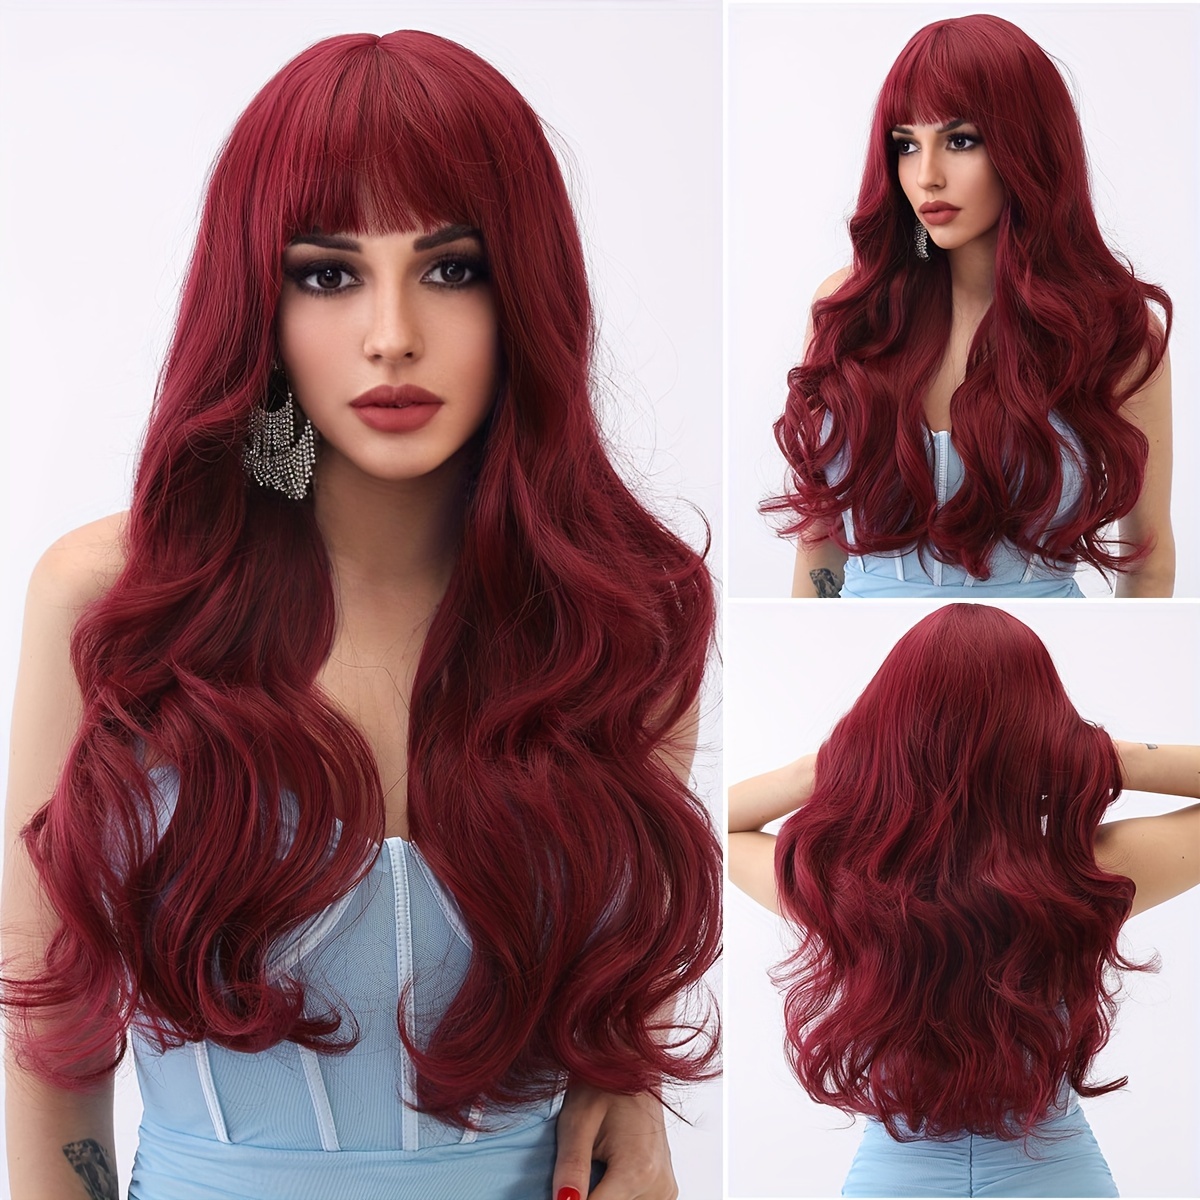 

26 Inch Red Bangs Curled Synthetic Wig - Heat-resistant, Easy To Shape, Paired With A Comfortable Rose Mesh Hat, Suitable For Daily Fashion And Role-playing